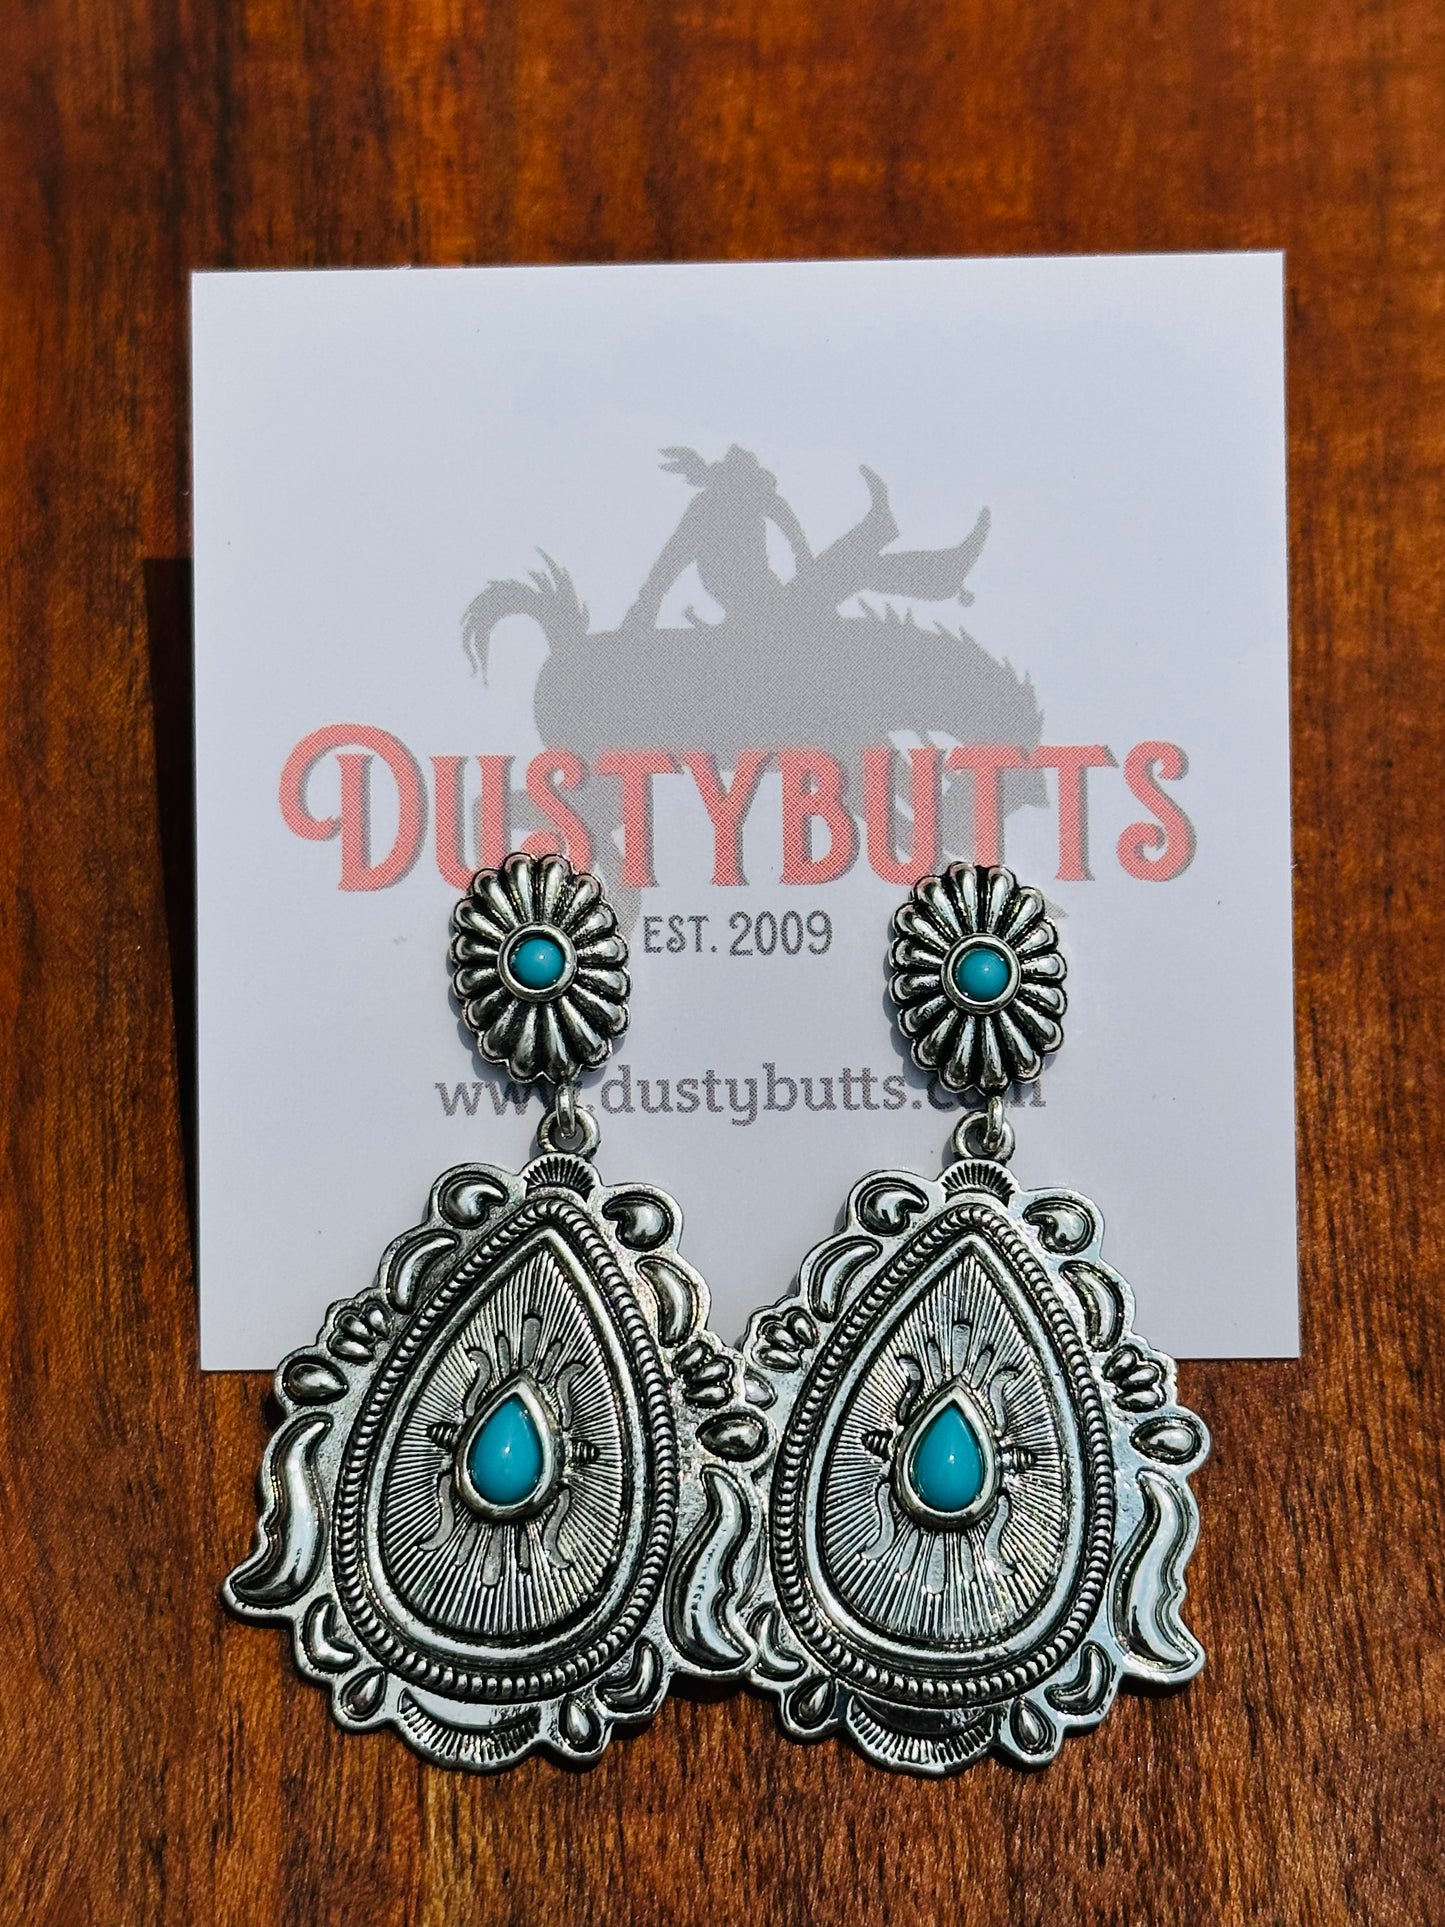 Turquoise and Silver Drop Earrings